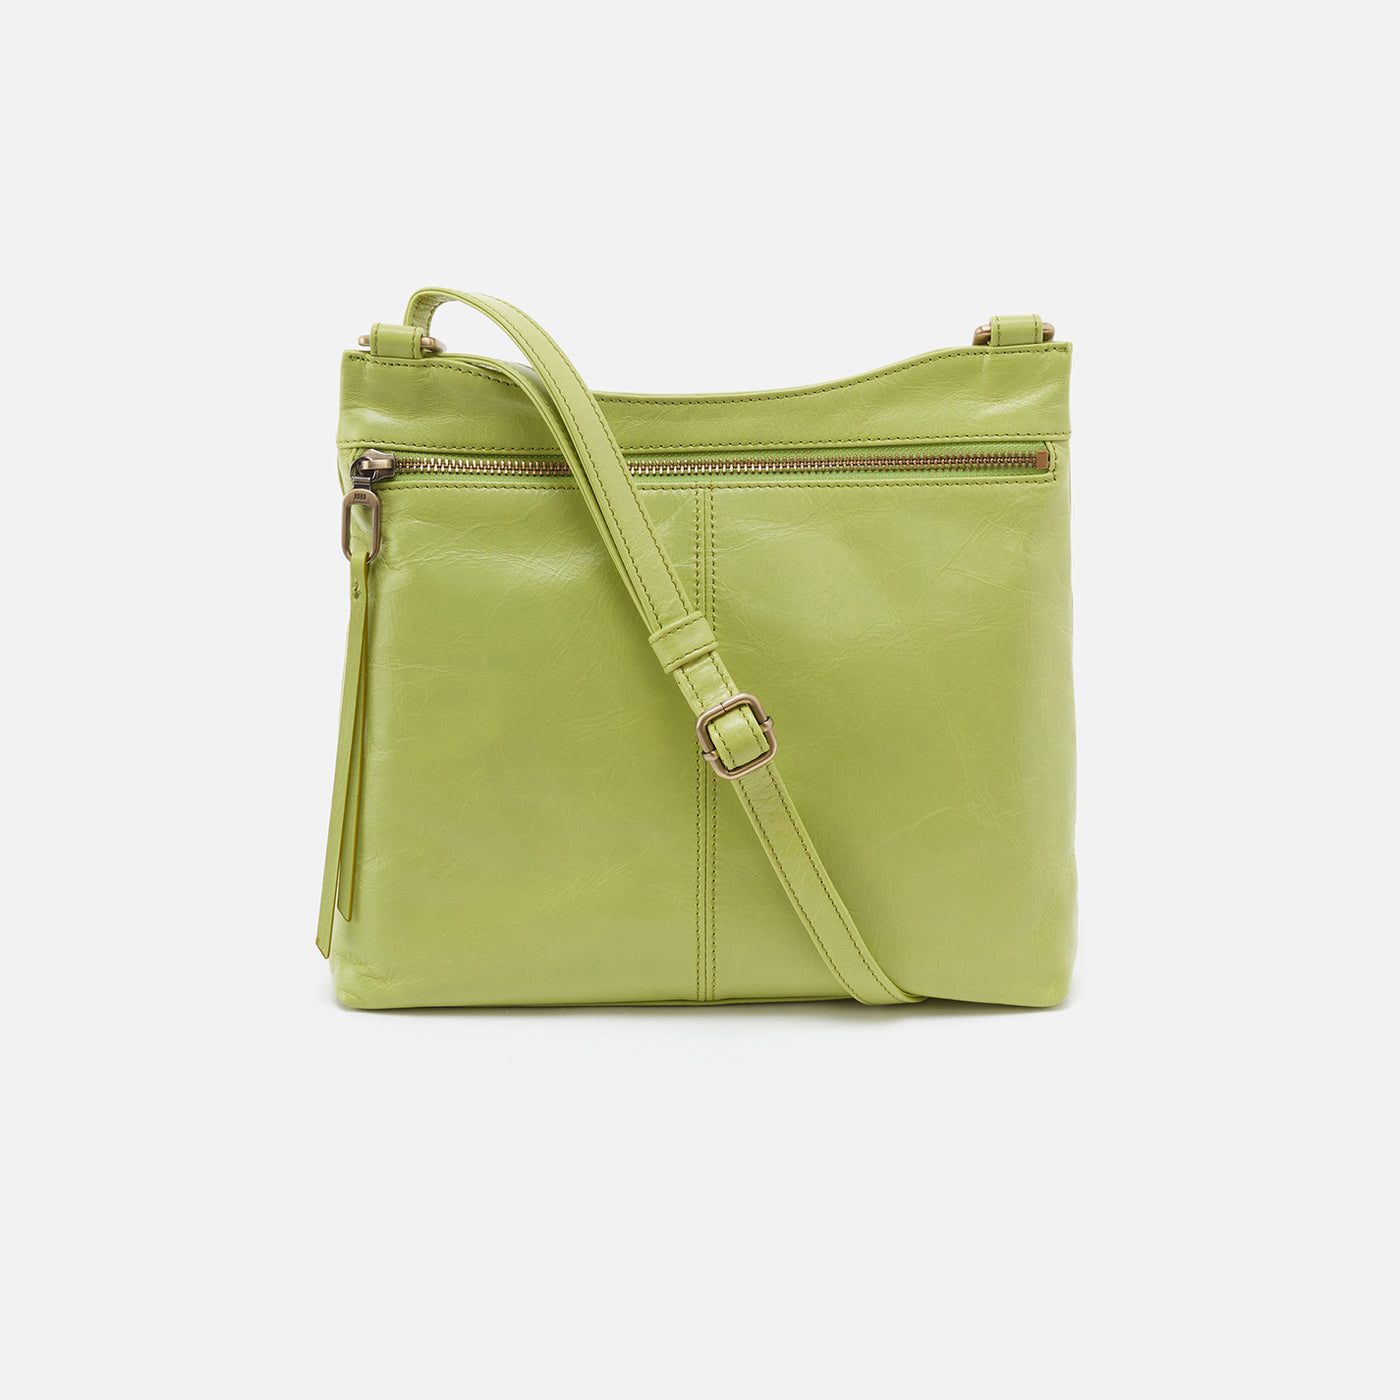 Cambel Crossbody in Polished Leather - Celery